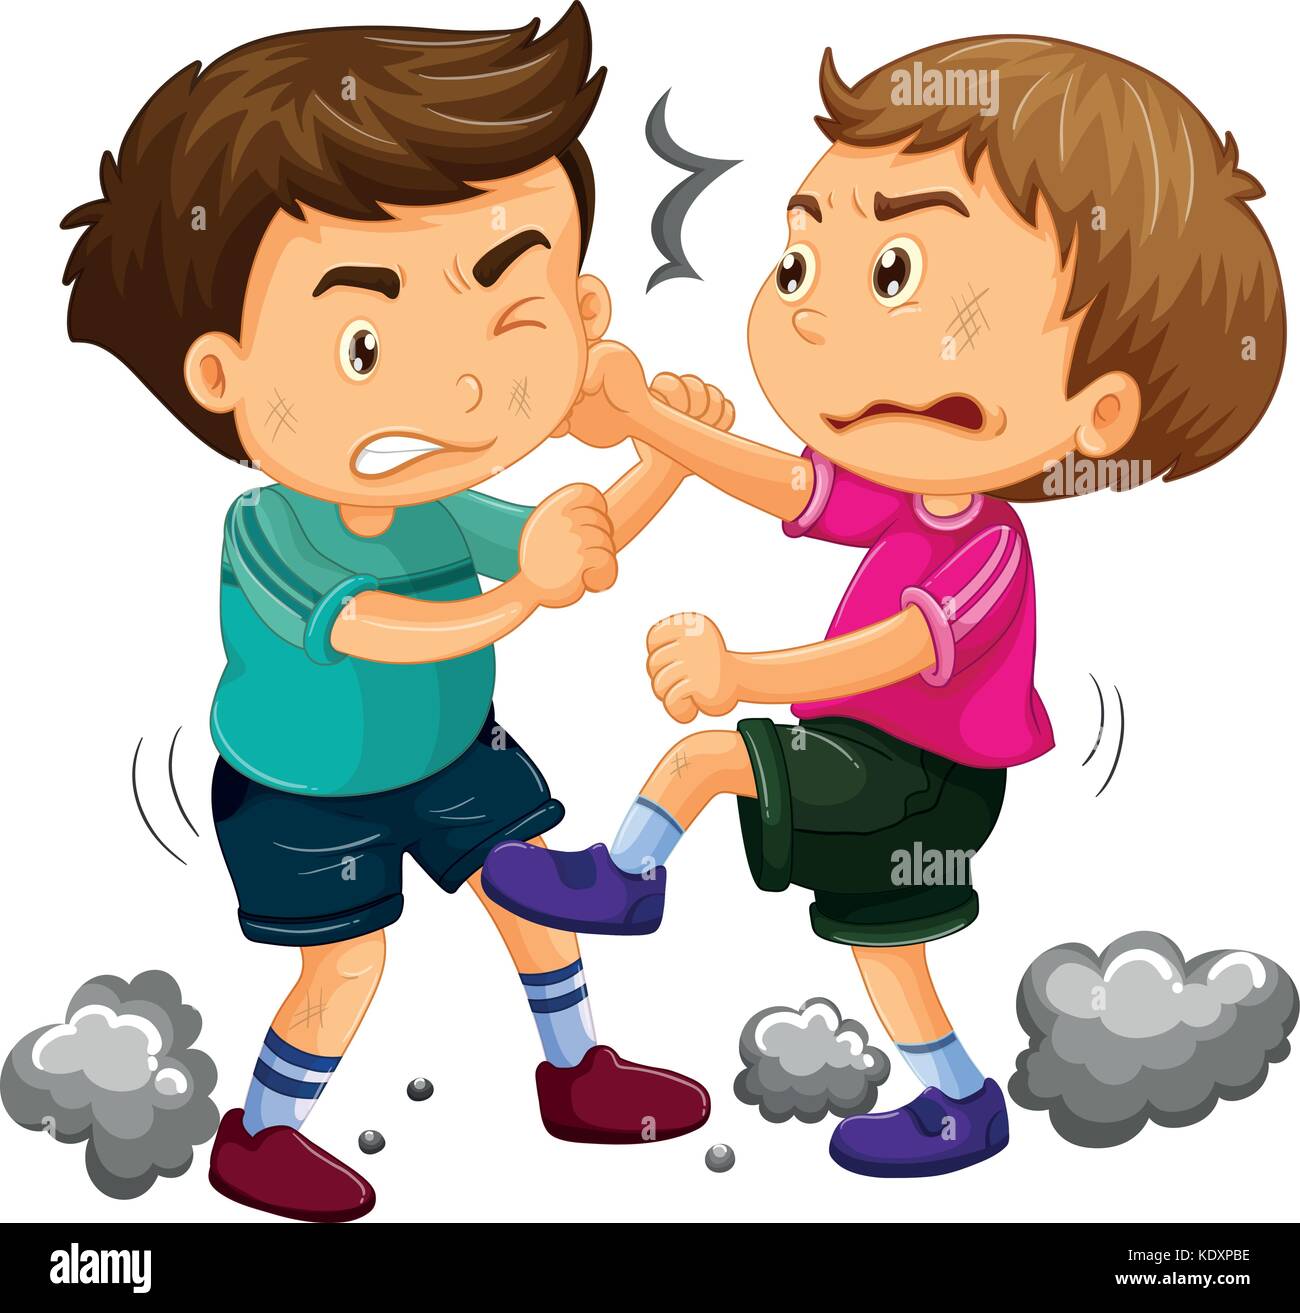 Two young boys fighting  illustration Stock Vector